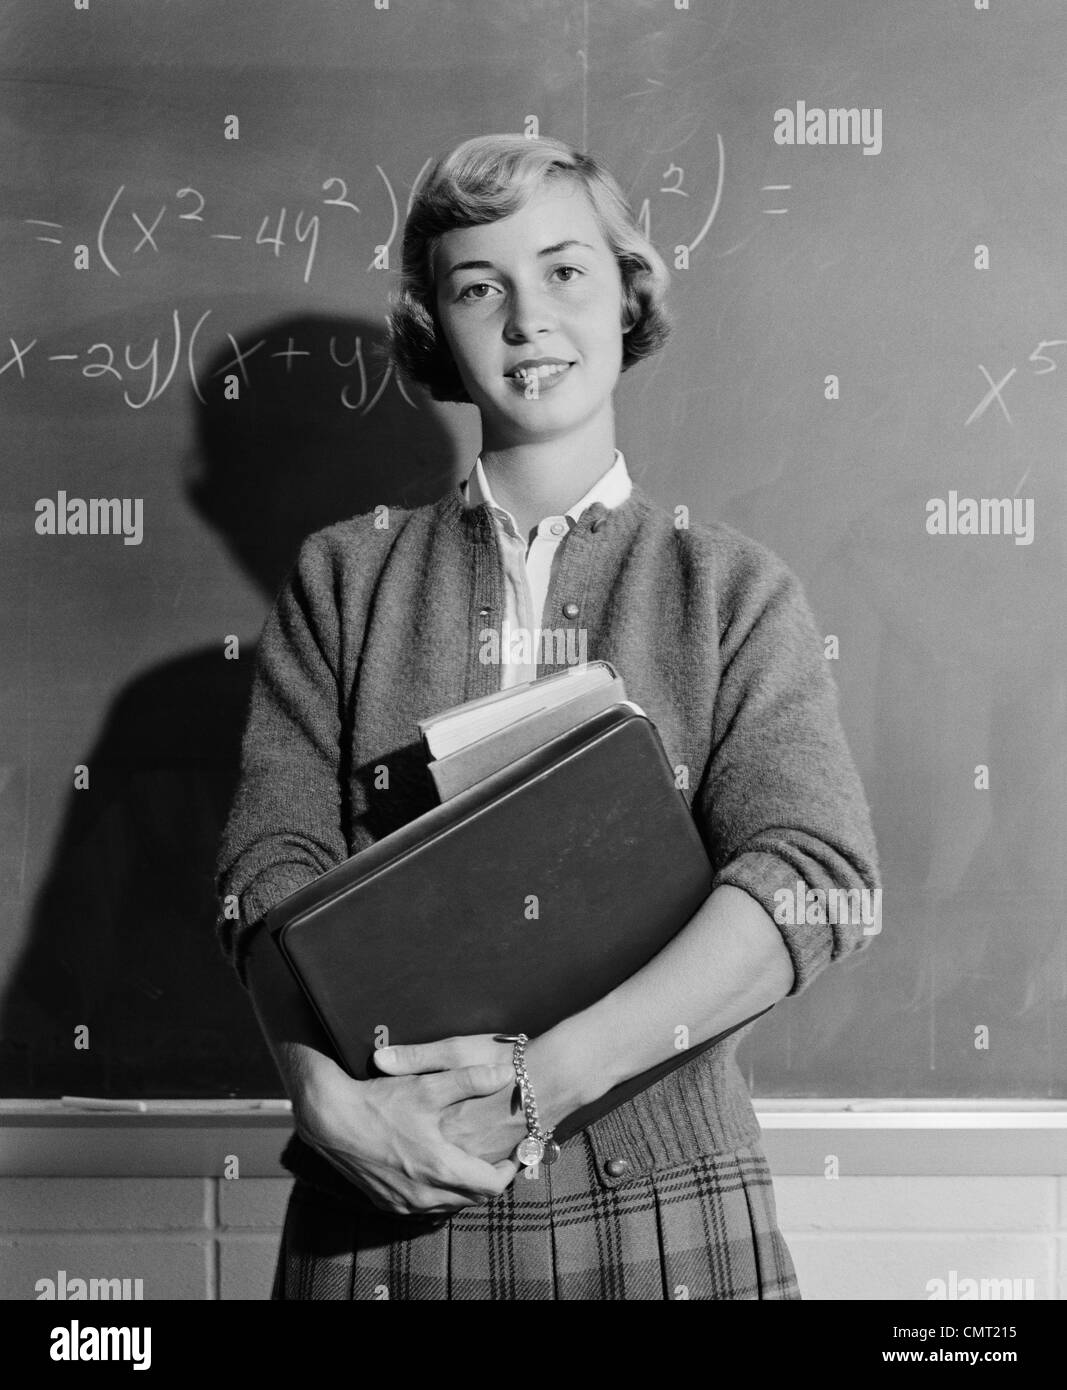 1960s TEENAGE GIRL HOLDING SCHOOL BOOKS STANDING IN FRONT OF BLACKBOARD LOOKING AT CAMERA Stock Photo